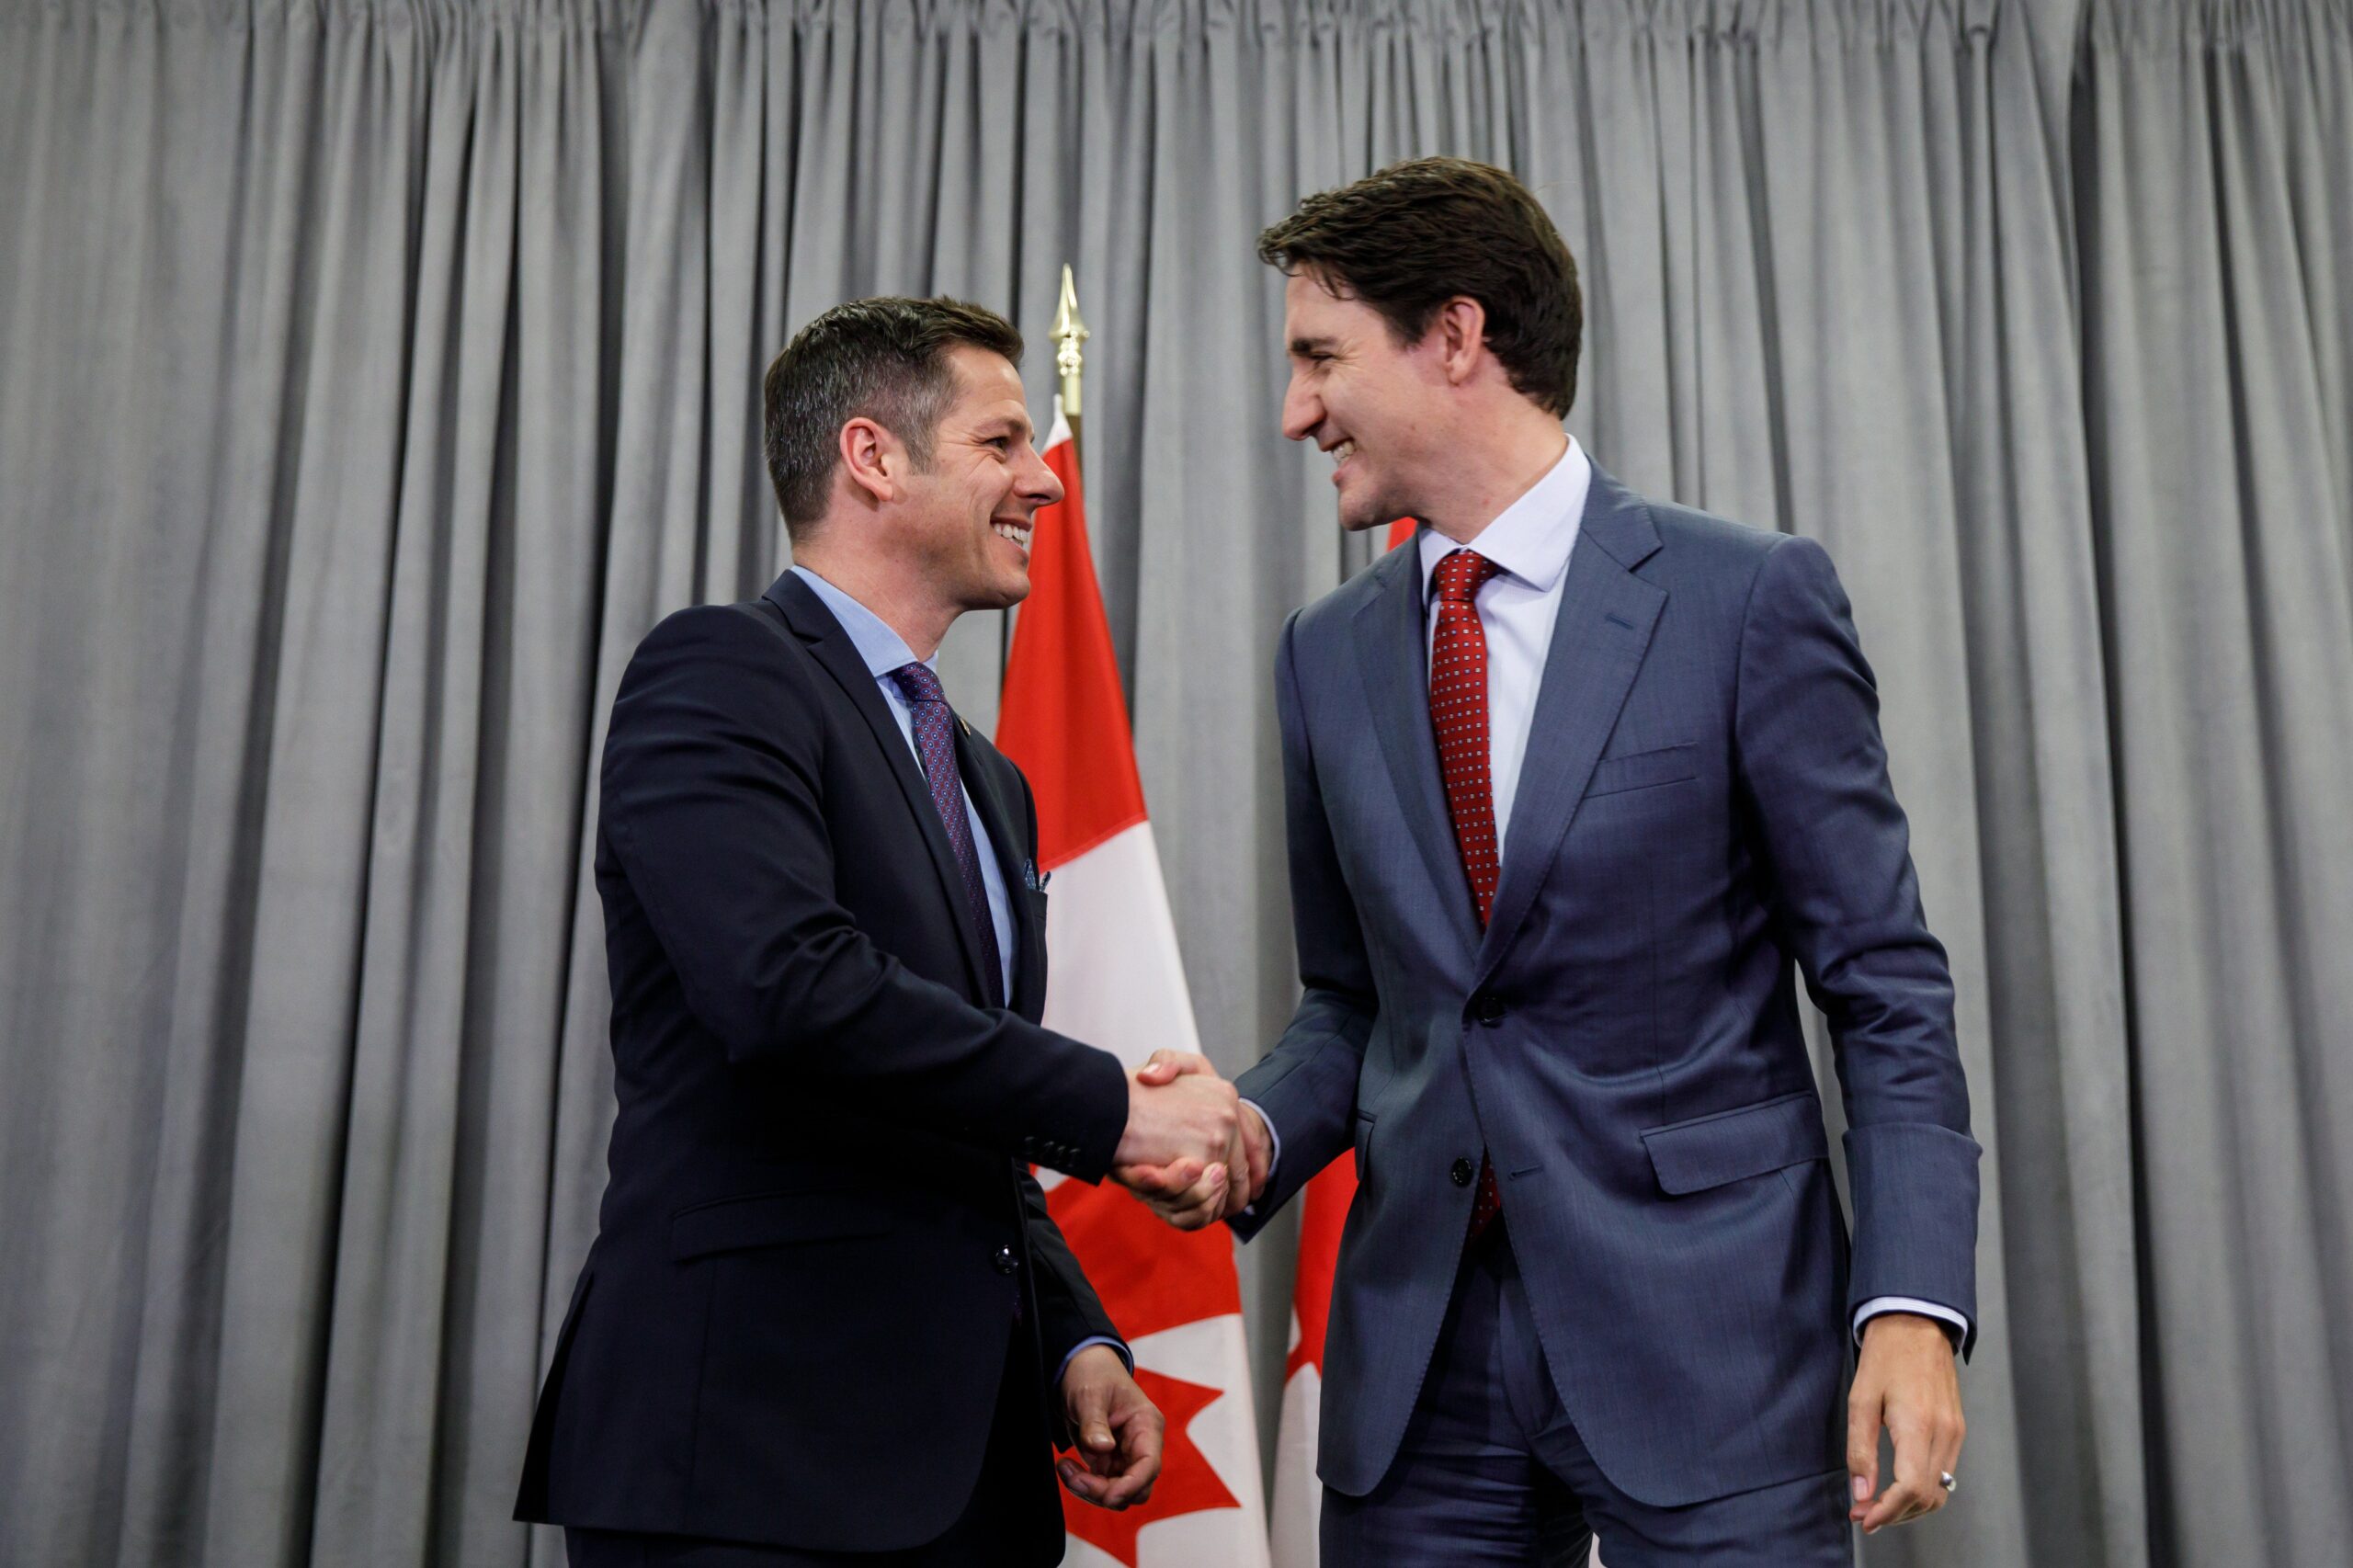 Prime Minister Justin Trudeau meets with Mayor of Winnipeg Brian Bowman